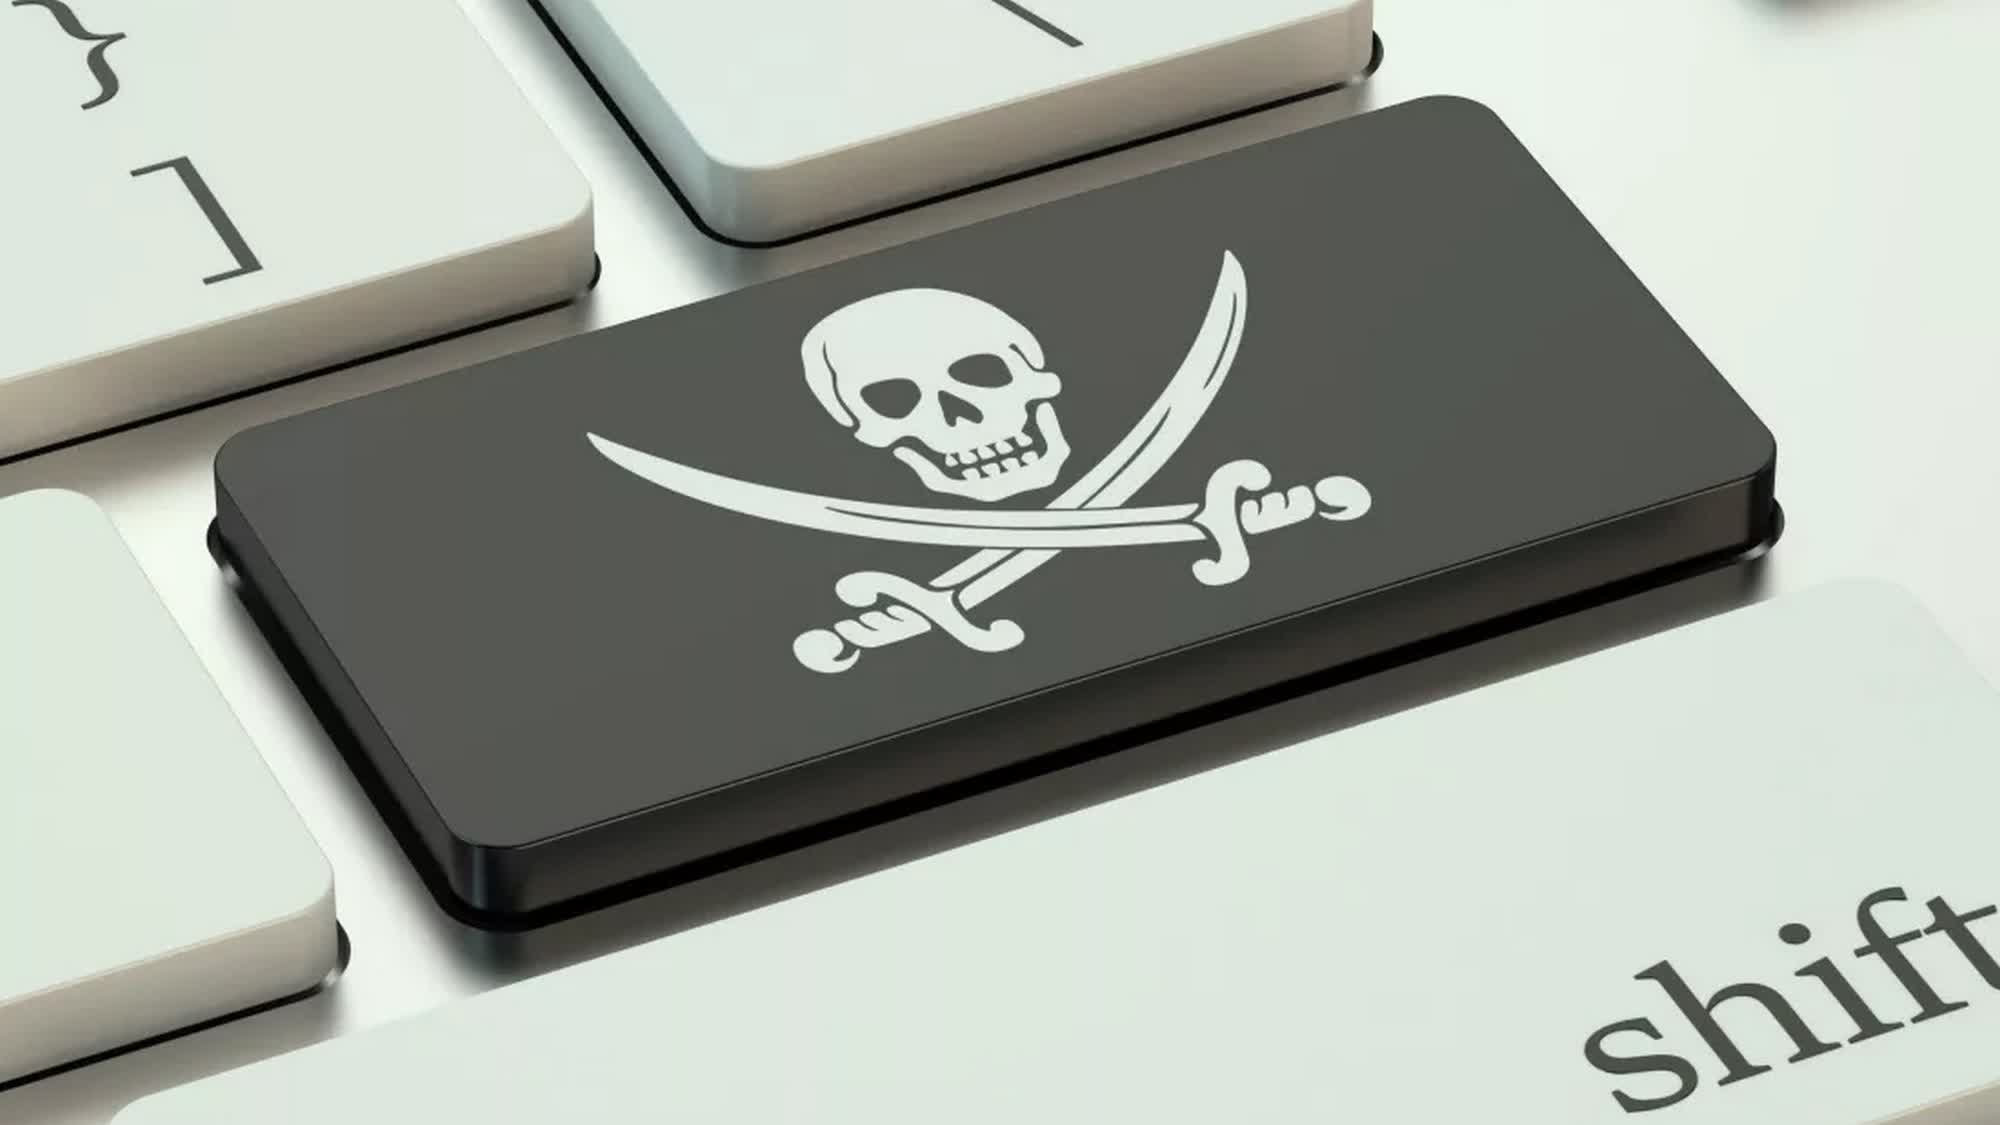 Europe wants all countries to block pirate sites to combat online piracy